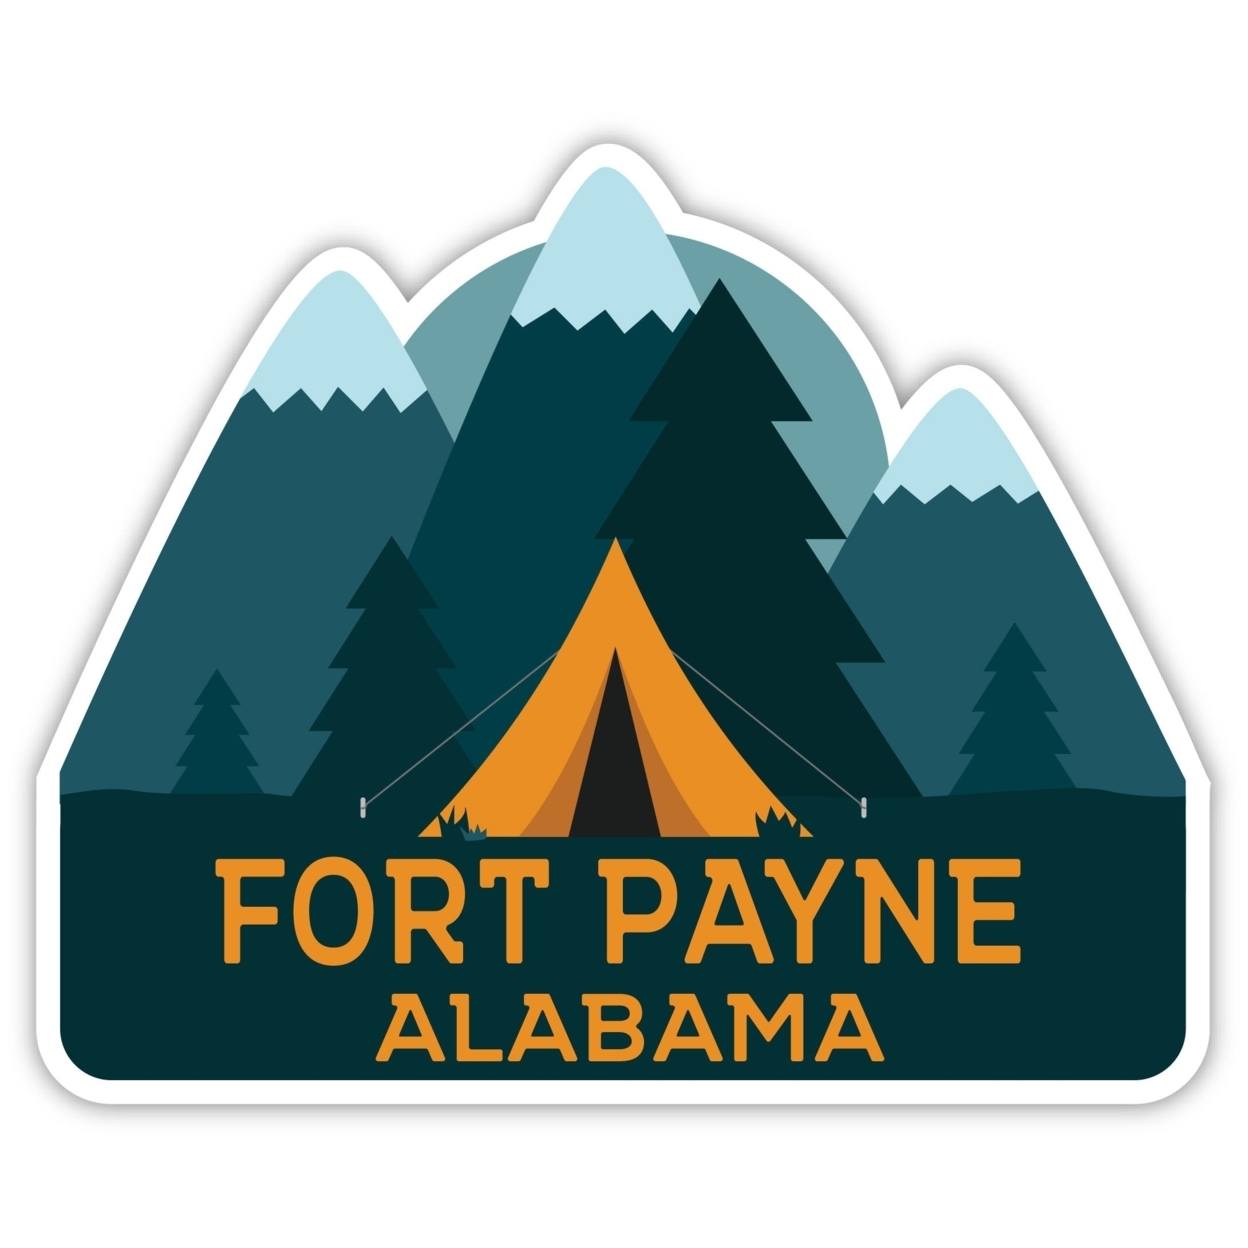 Fort Payne Alabama Souvenir Decorative Stickers (Choose Theme And Size) - 4-Pack, 4-Inch, Camp Life